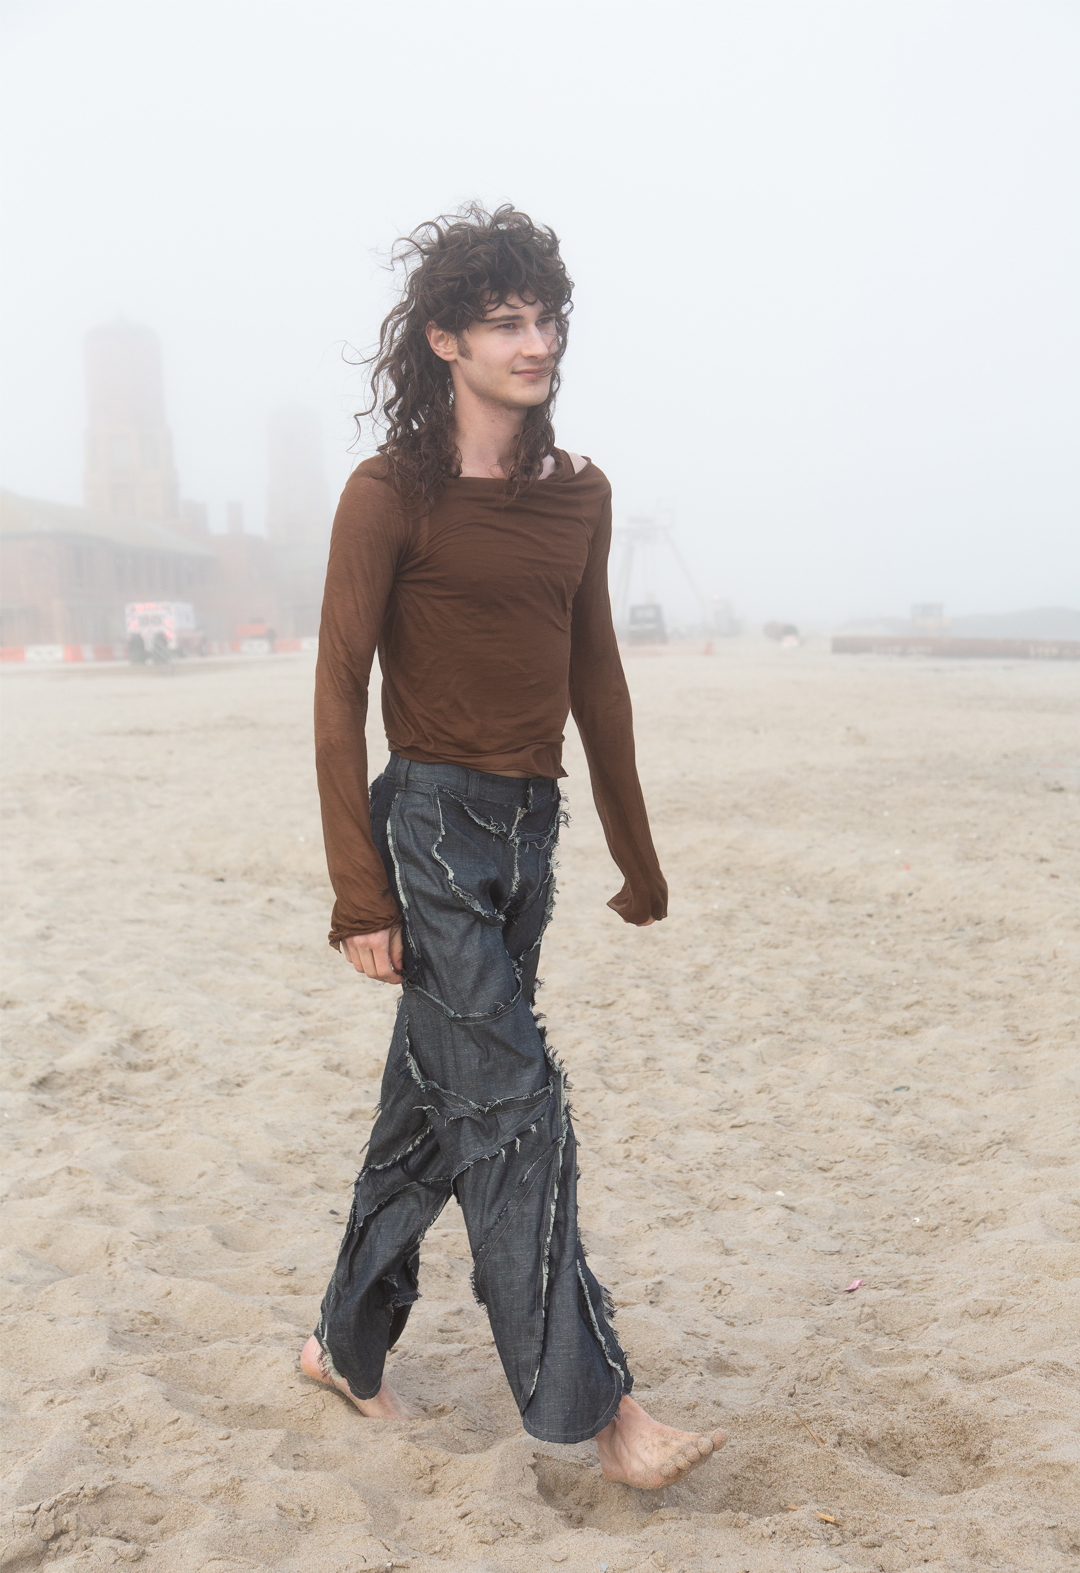 A model wears a two-way-stretch, soft-knit brown long-sleeved top, over a tank top in the same knit fabric, along with midweight denim pants of a blueish gray wash that have raw fraying edges, patched together by many pieces. 